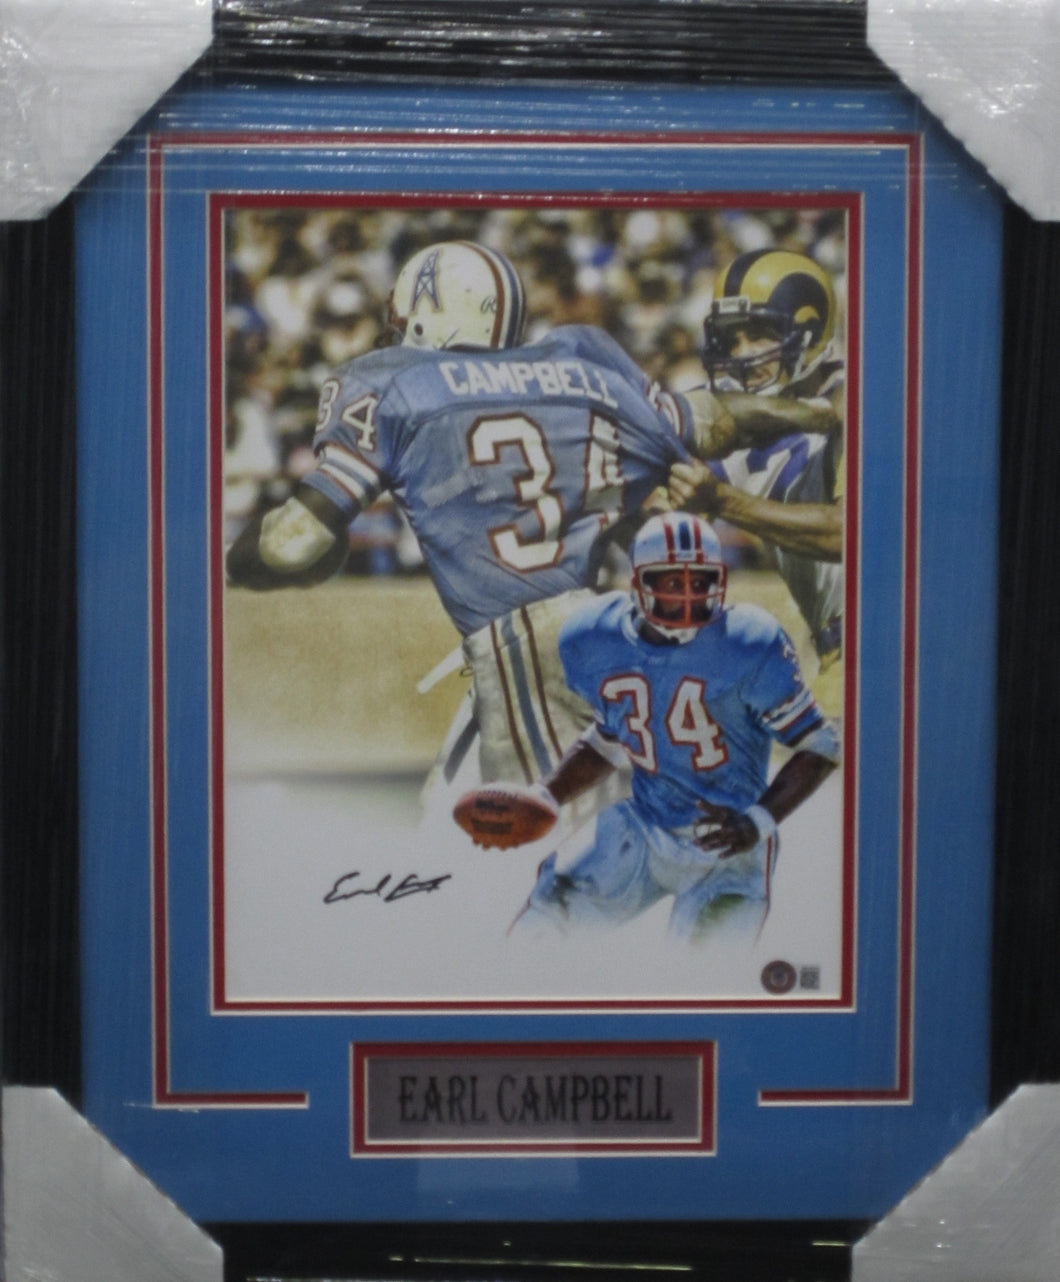 Houston Oilers Earl Campbell Signed 11x14 Photo Framed & Matted with BECKETT COA